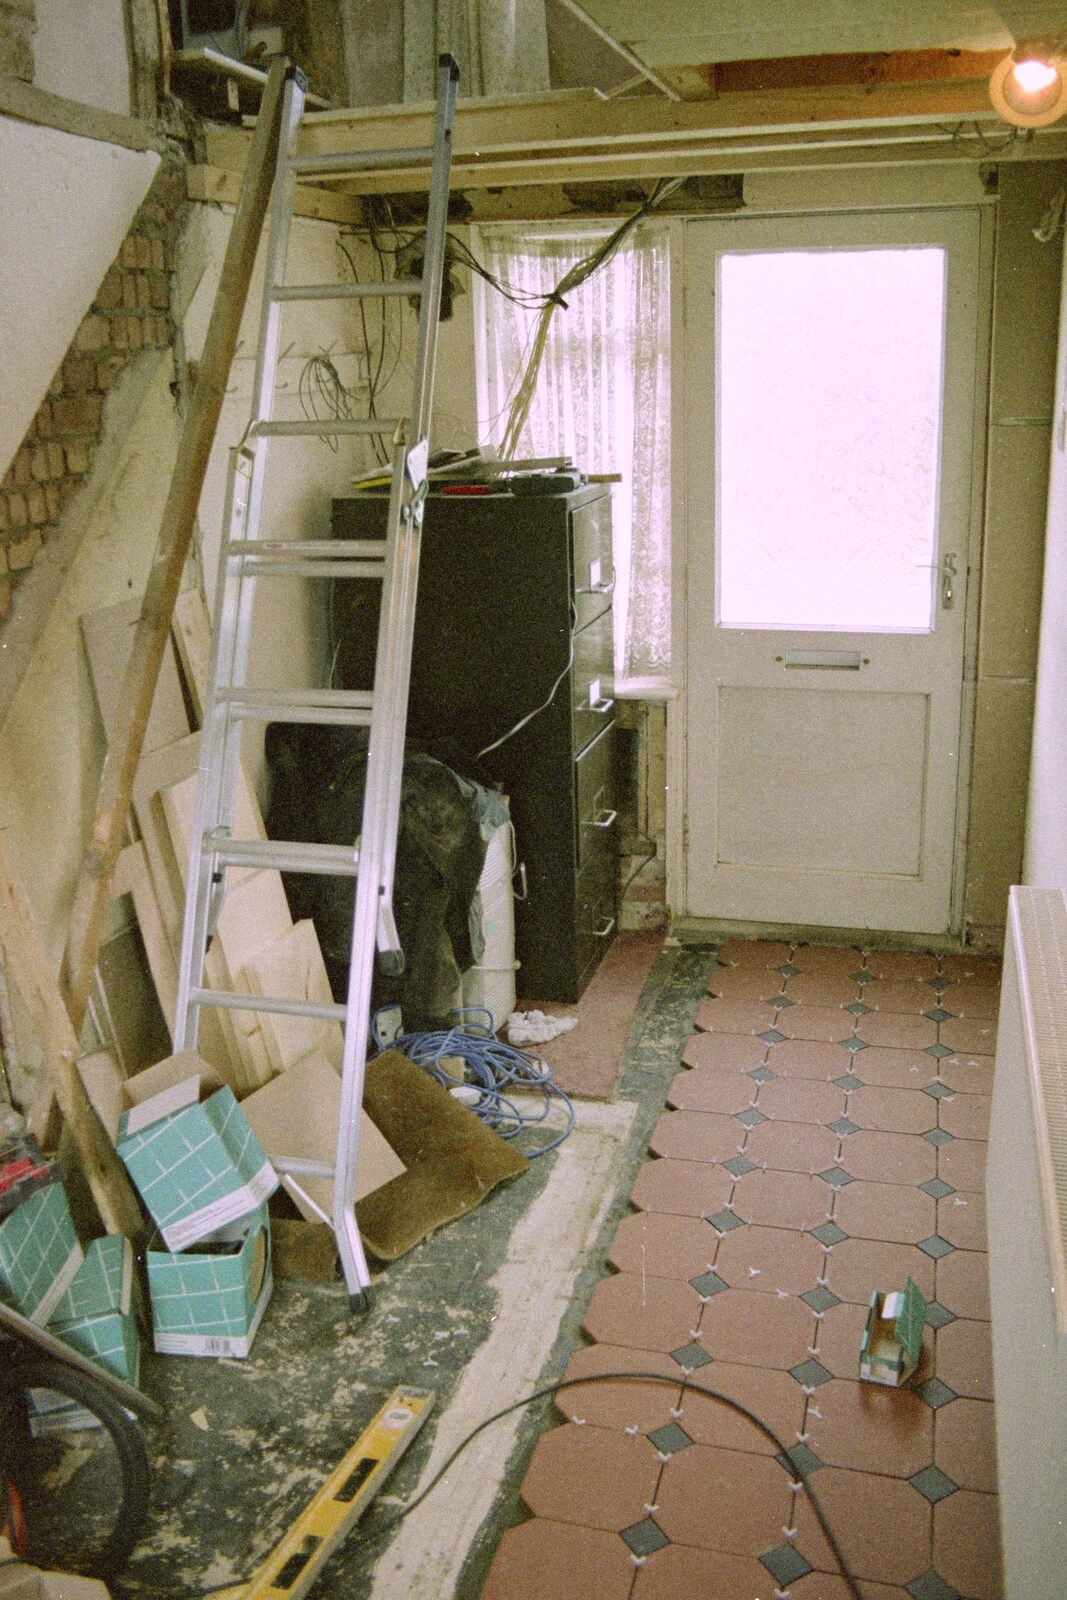 The old staircase has gone from 3G Lab, and Building a Staircase, Brome, Suffolk - 11th February 2001